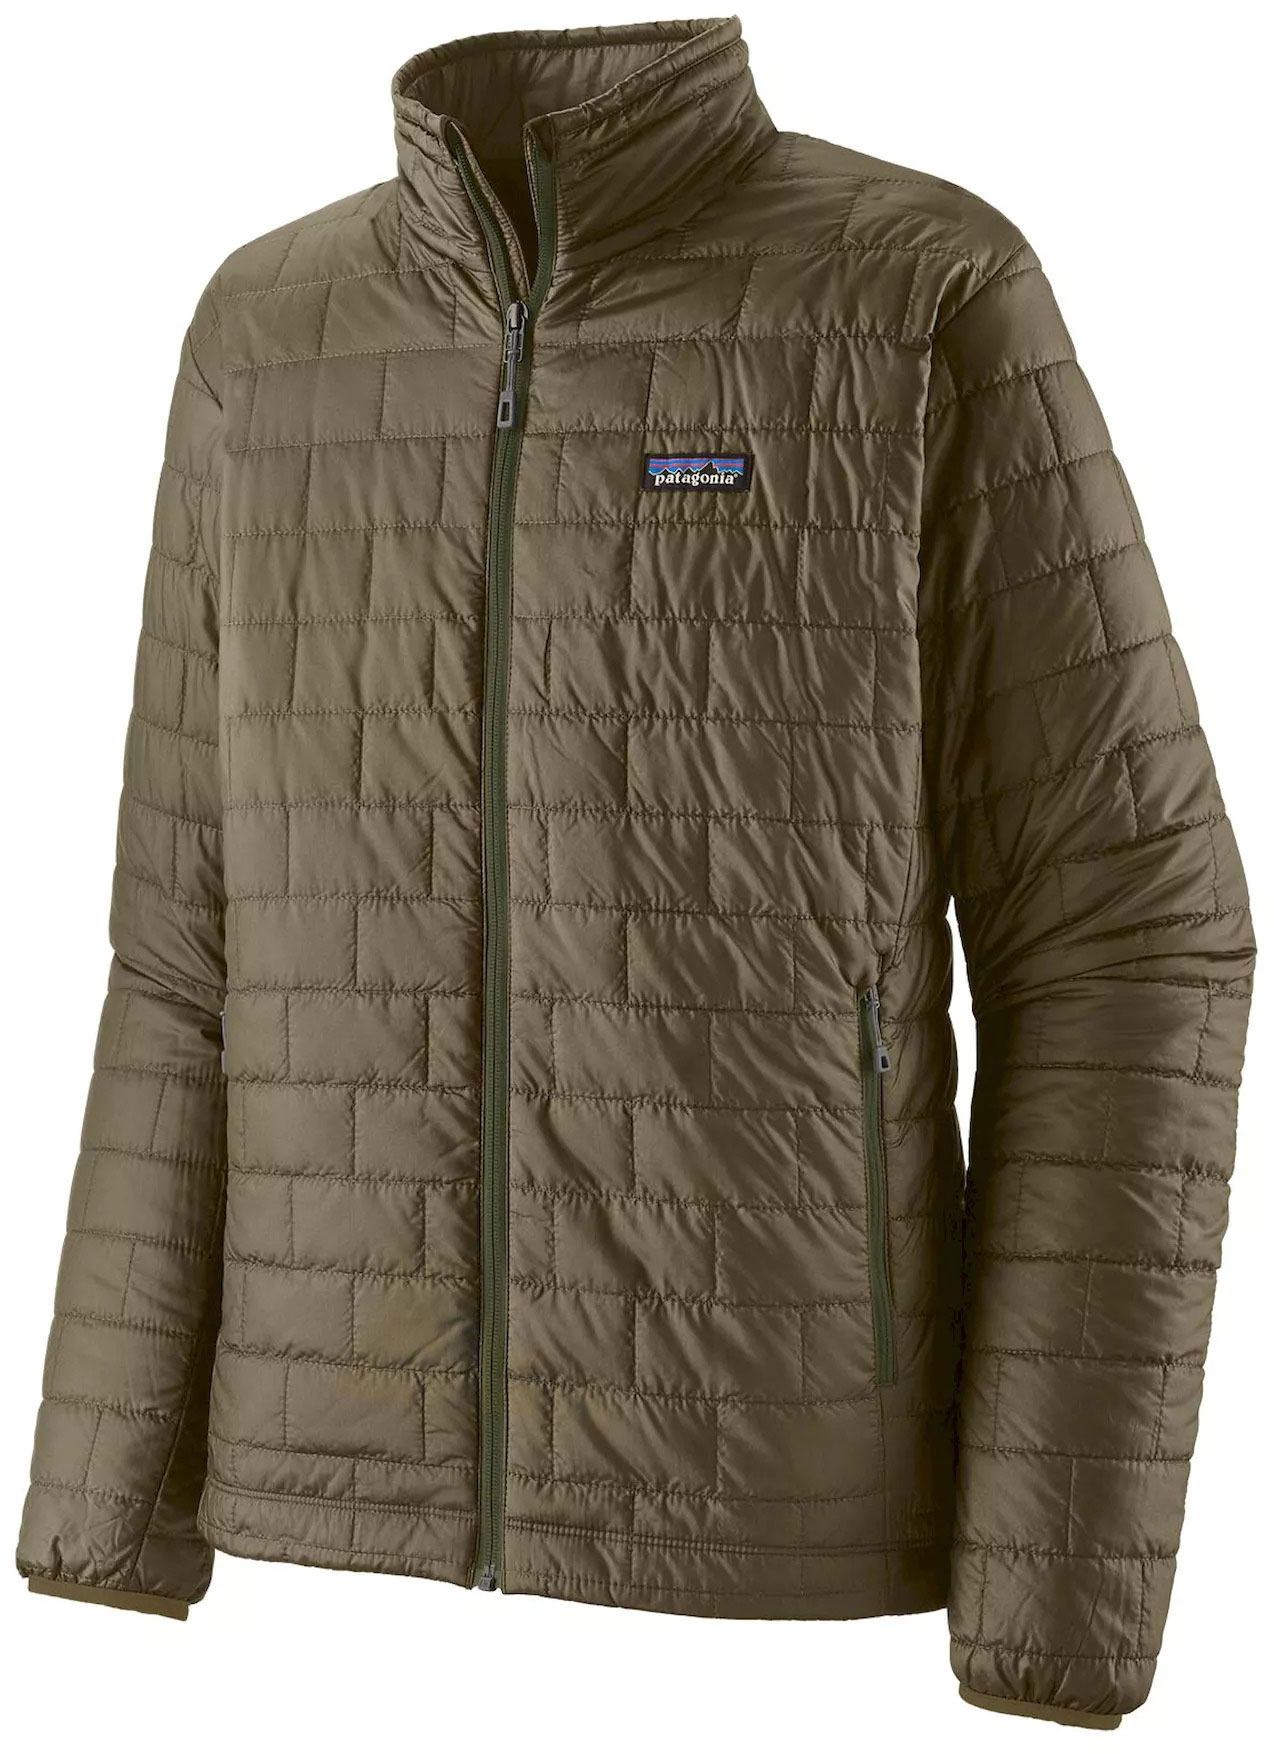 Patagonia-Nano-Puff-Synthetic-Insulated-Jacket